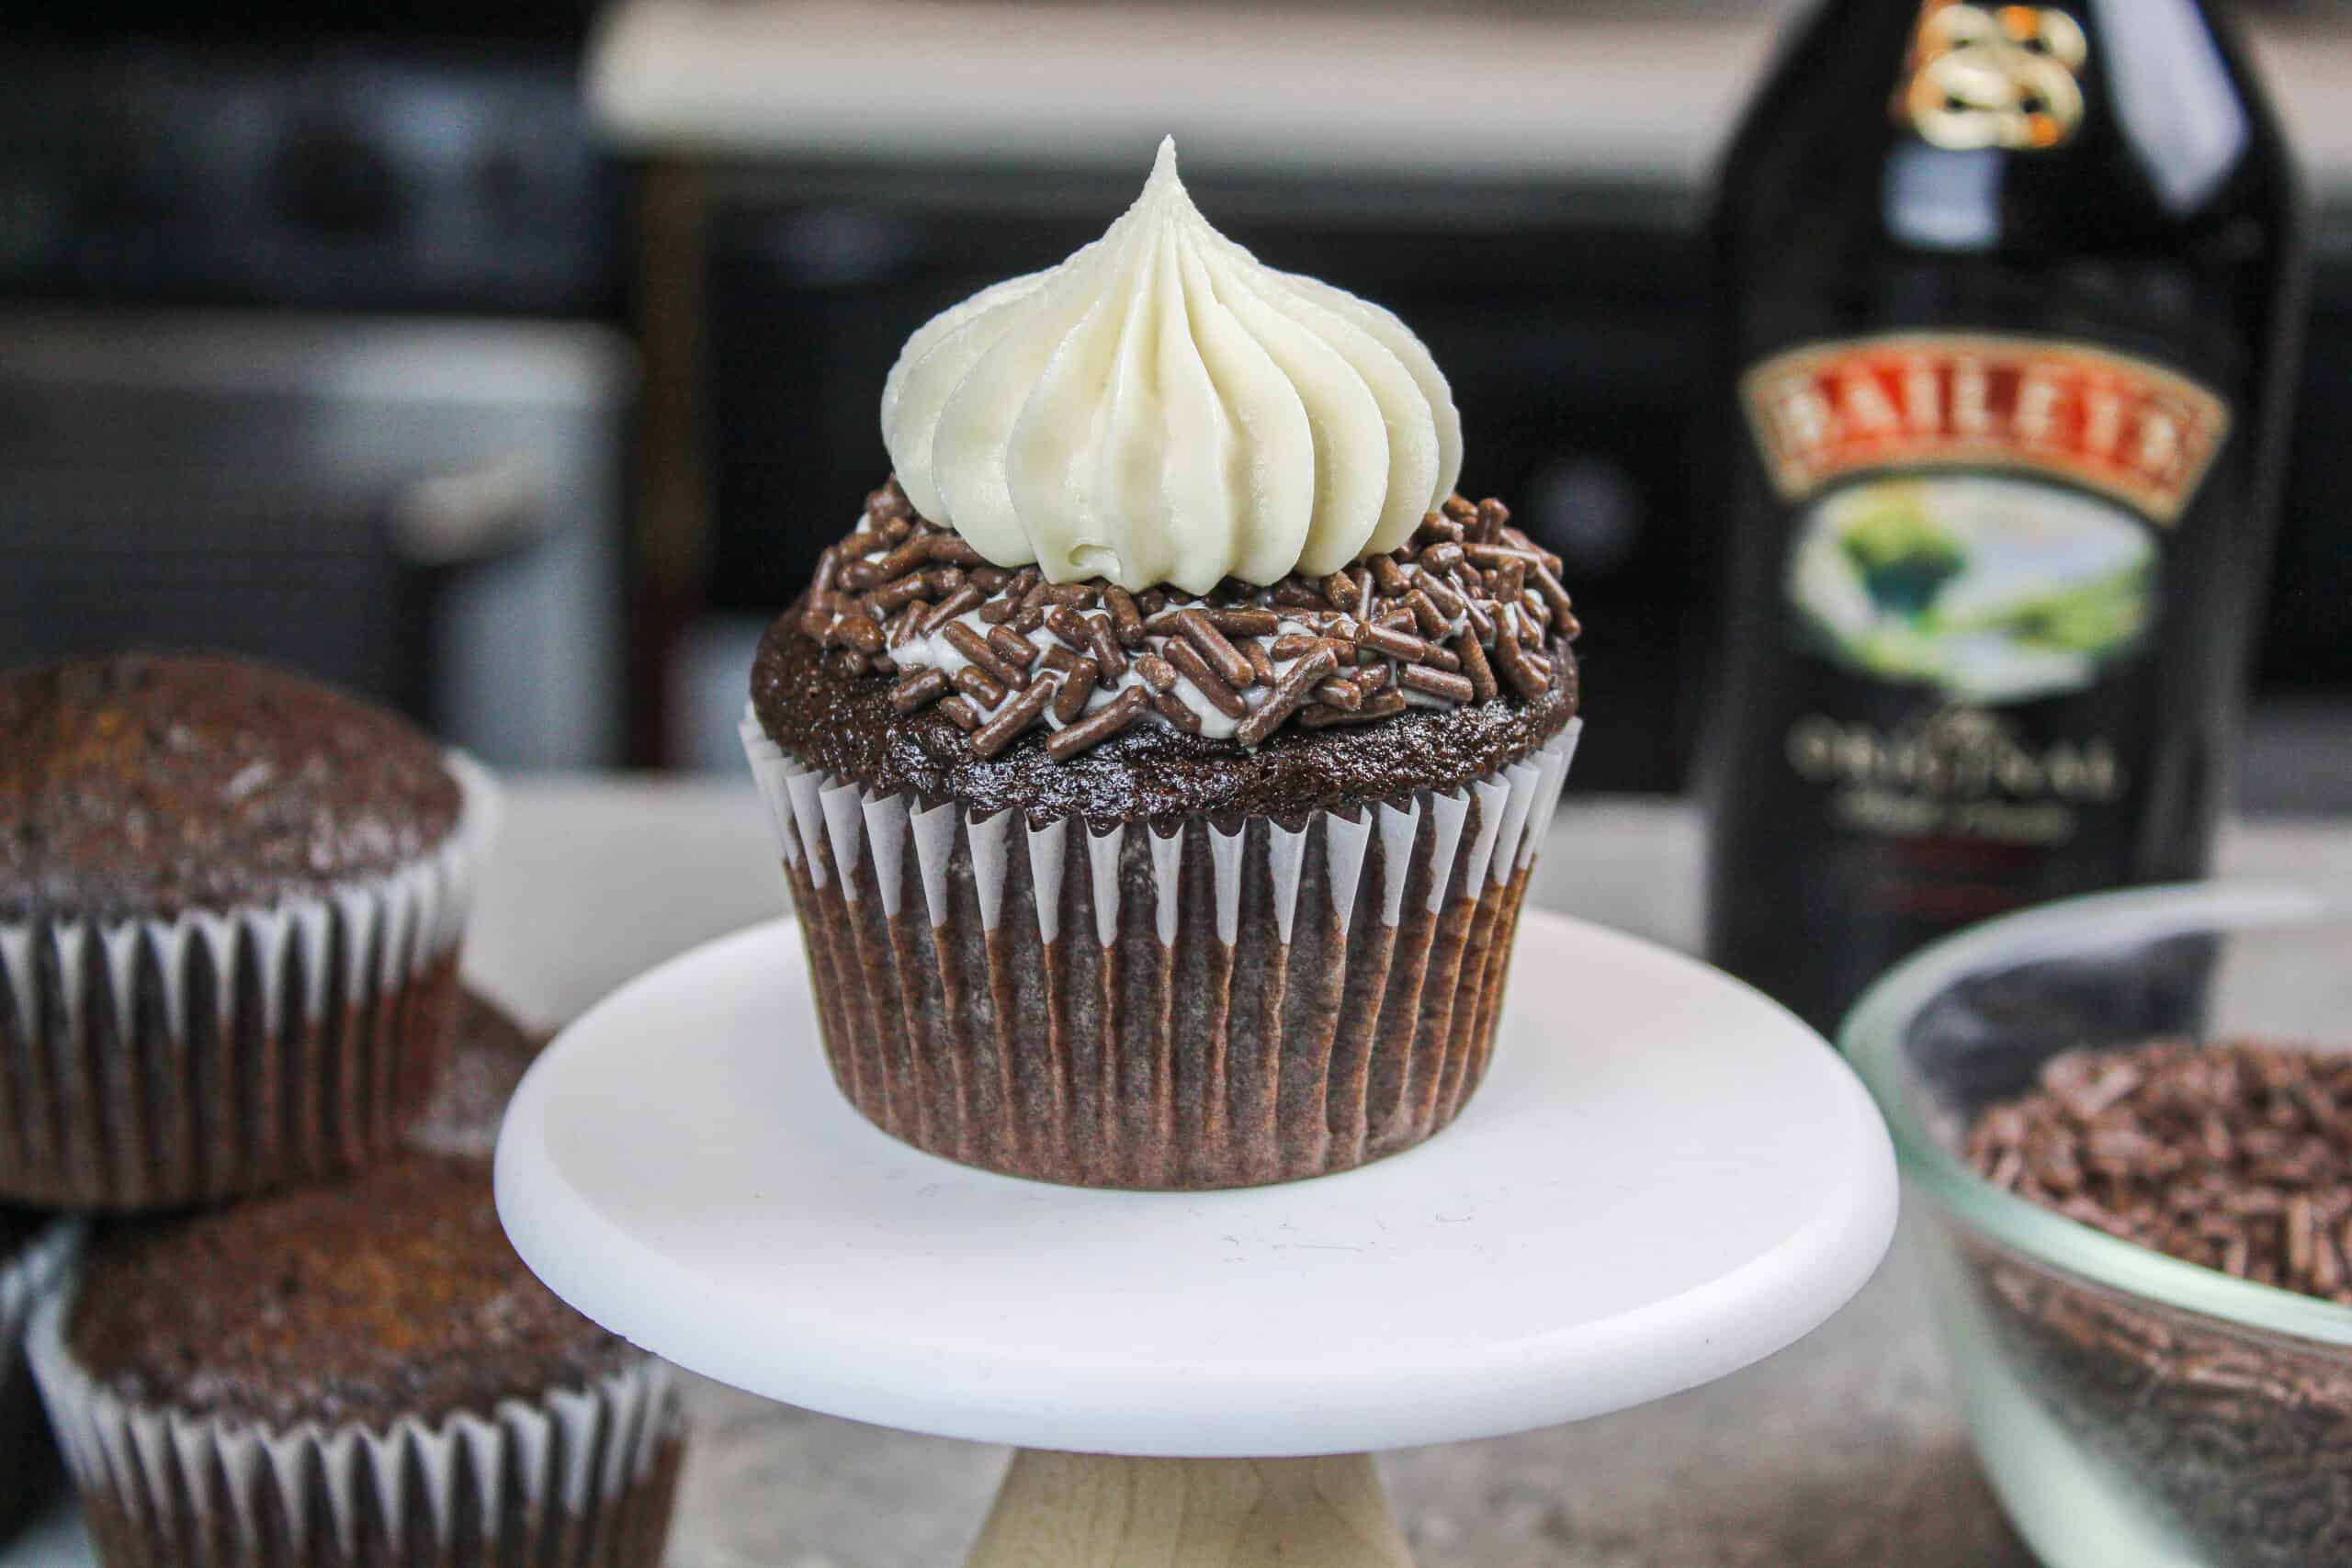 photo of a baileys chocolate cupcake on a small cupcake stand, decorated with chocolate sprinkles